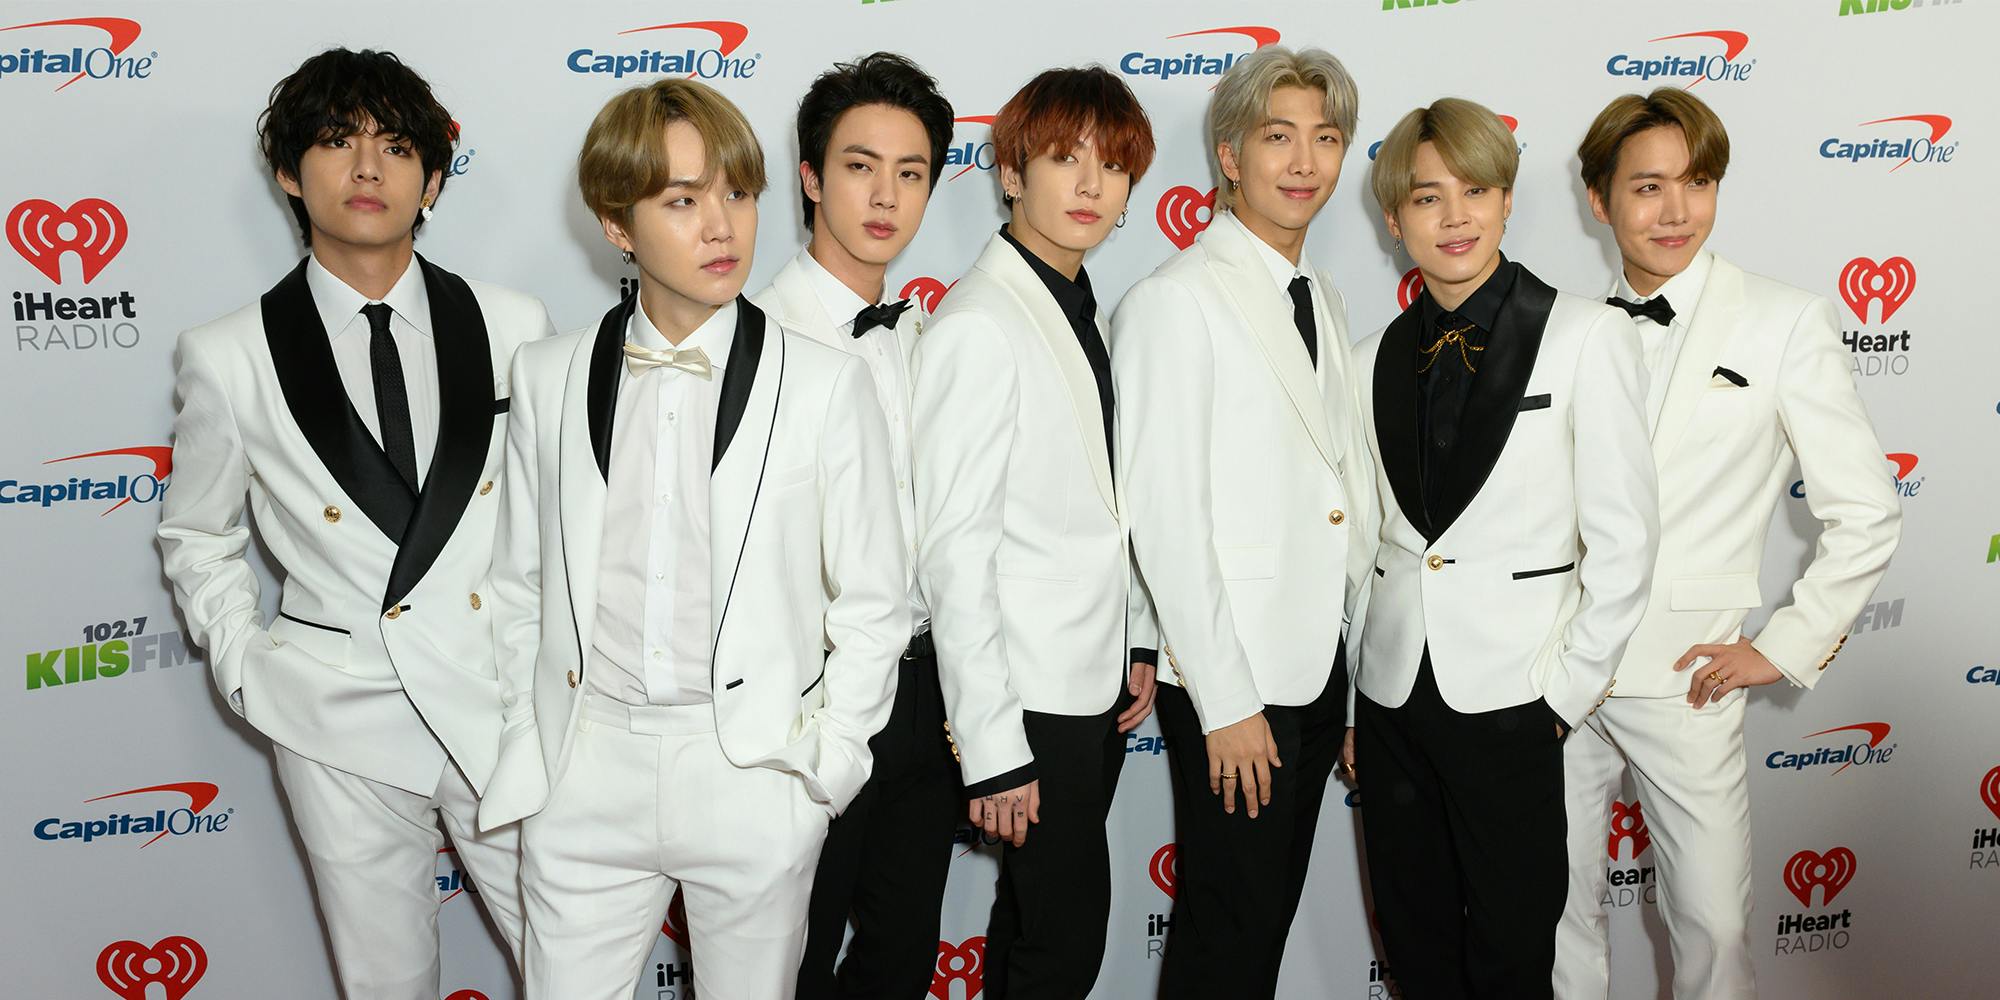 Grammys 2022: BTS scores only one nomination - Los Angeles Times